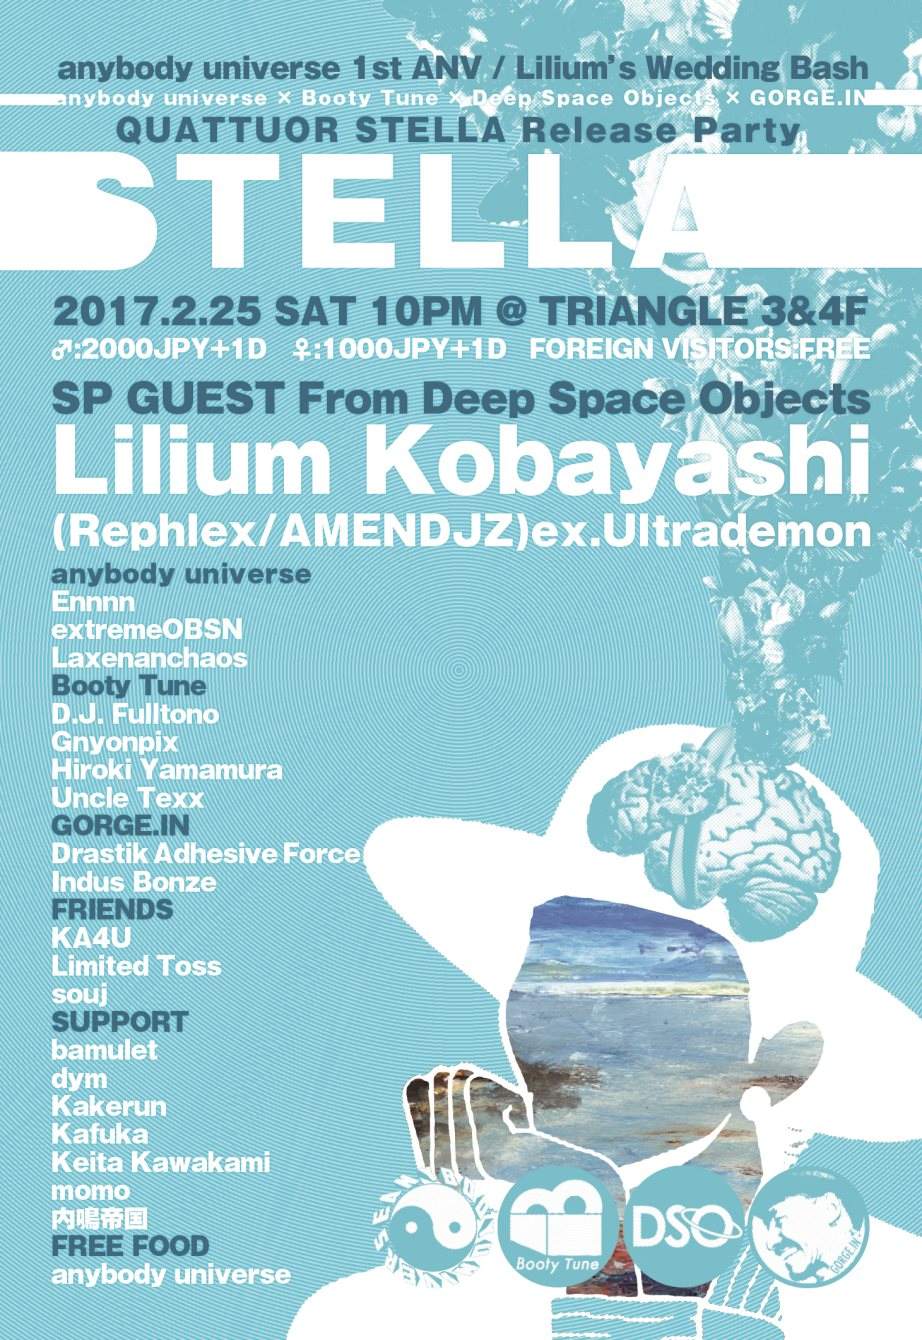 Anybodyuniverse×bootytune×dso×gorge.IN 'Quattuor Stella' Release Party - フライヤー表